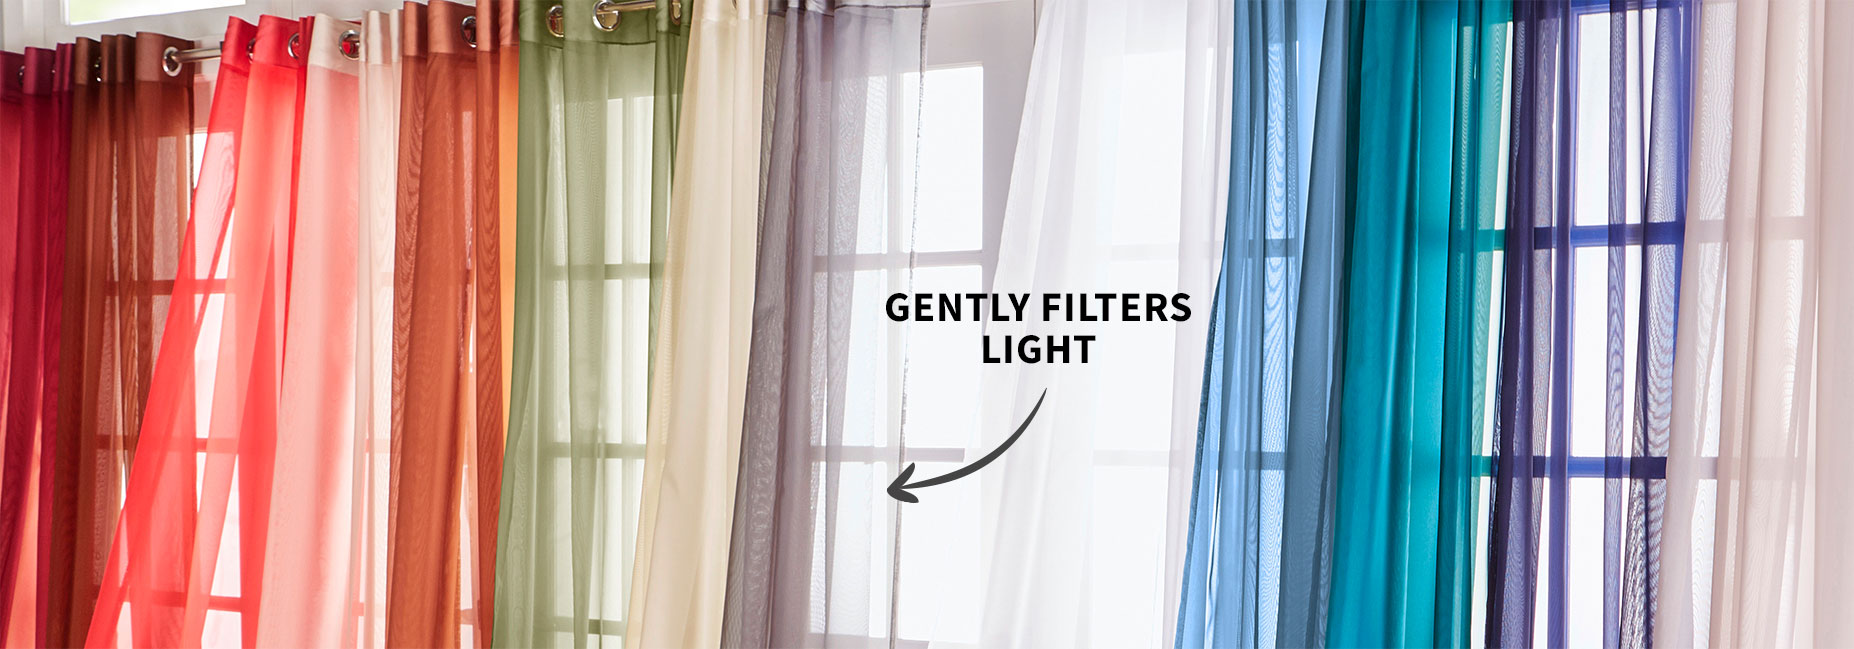 Curtains - Gently filters lights